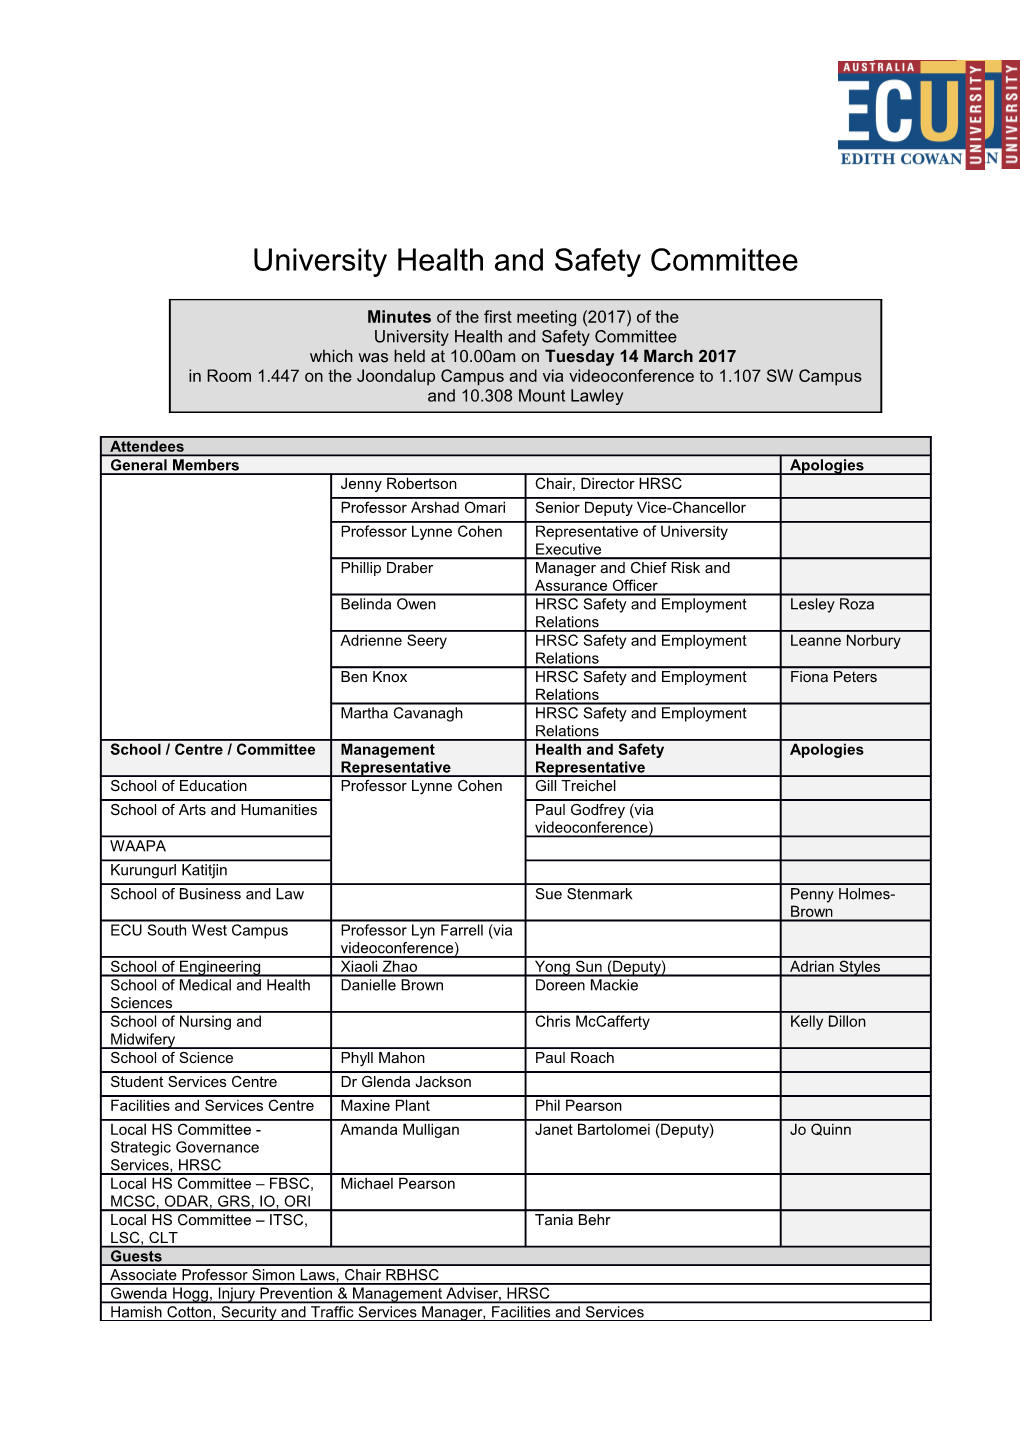 University Health and Safety Committee